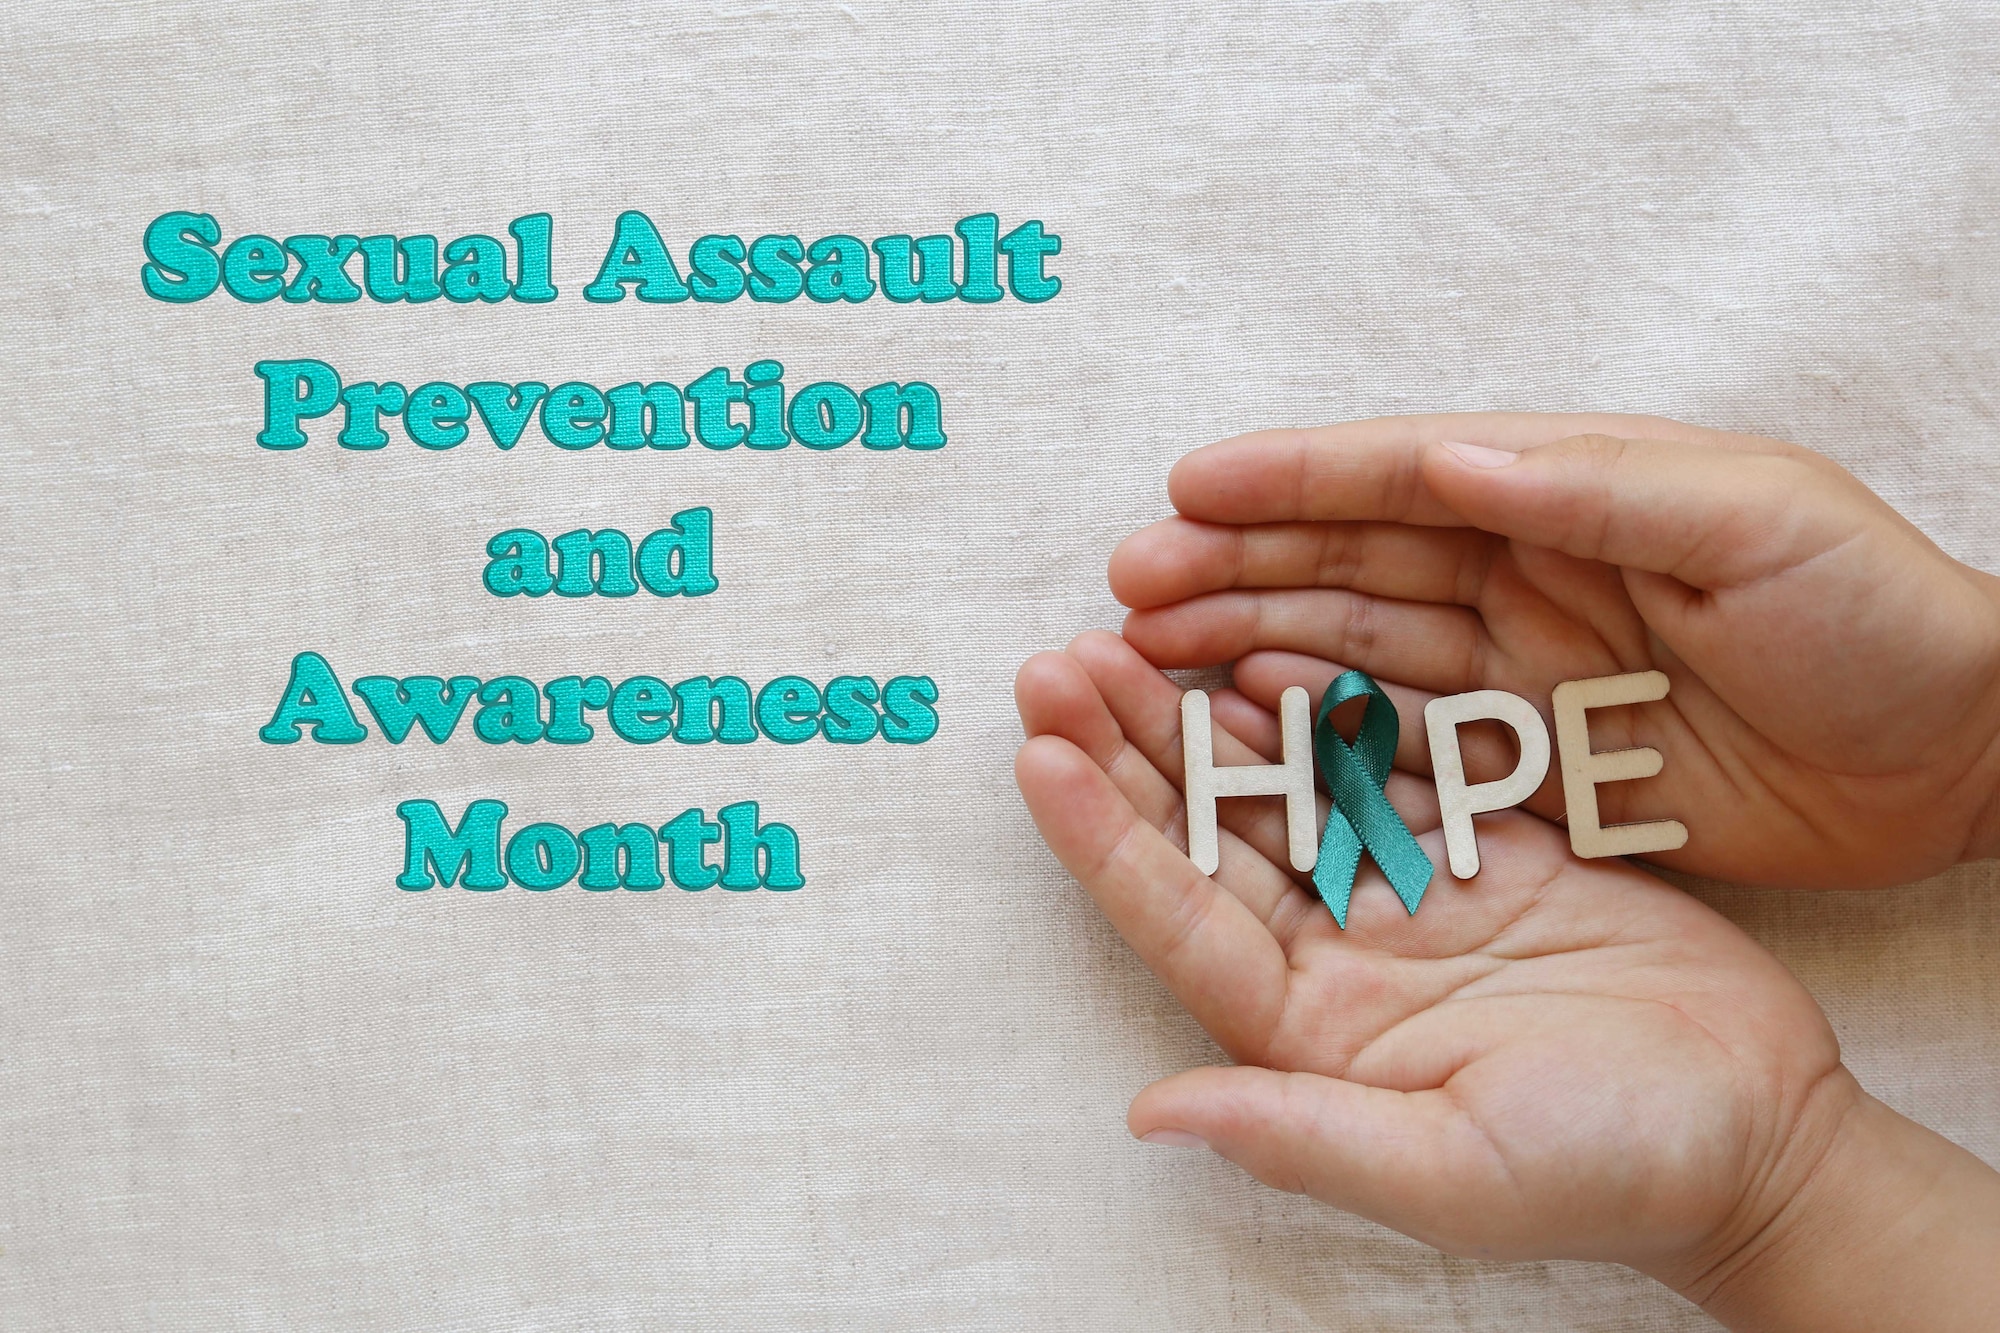 Graphic shows hands holding letters to spell HOPE with a teal ribbon replacing the "o" and includes the text, "Sexual Assault Prevention and Awareness Month" next to them.